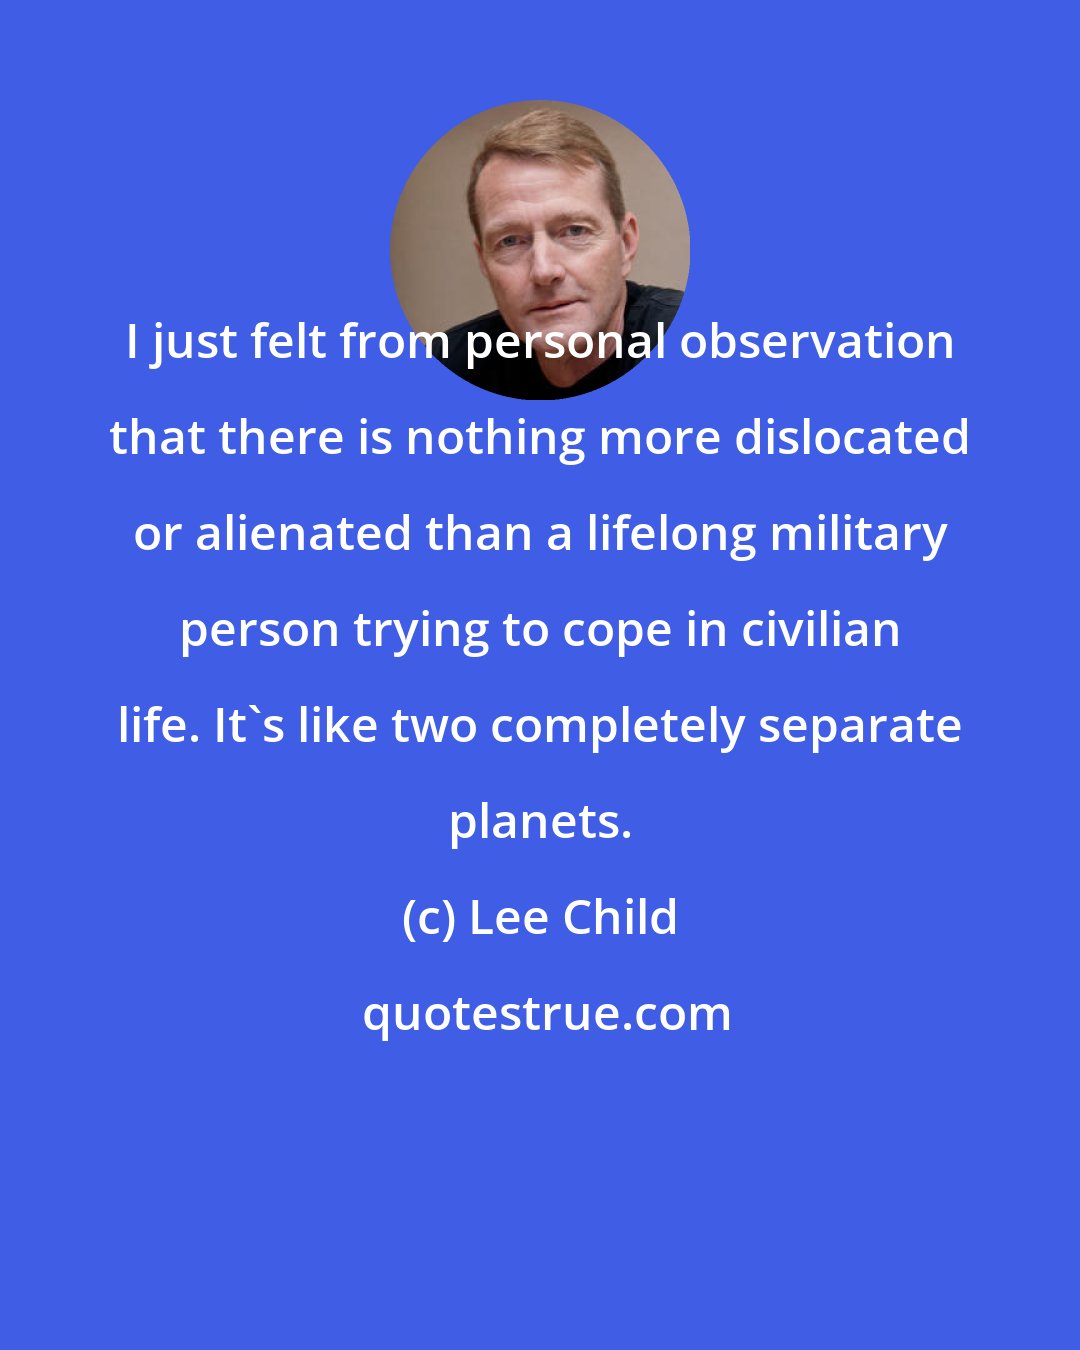 Lee Child: I just felt from personal observation that there is nothing more dislocated or alienated than a lifelong military person trying to cope in civilian life. It's like two completely separate planets.